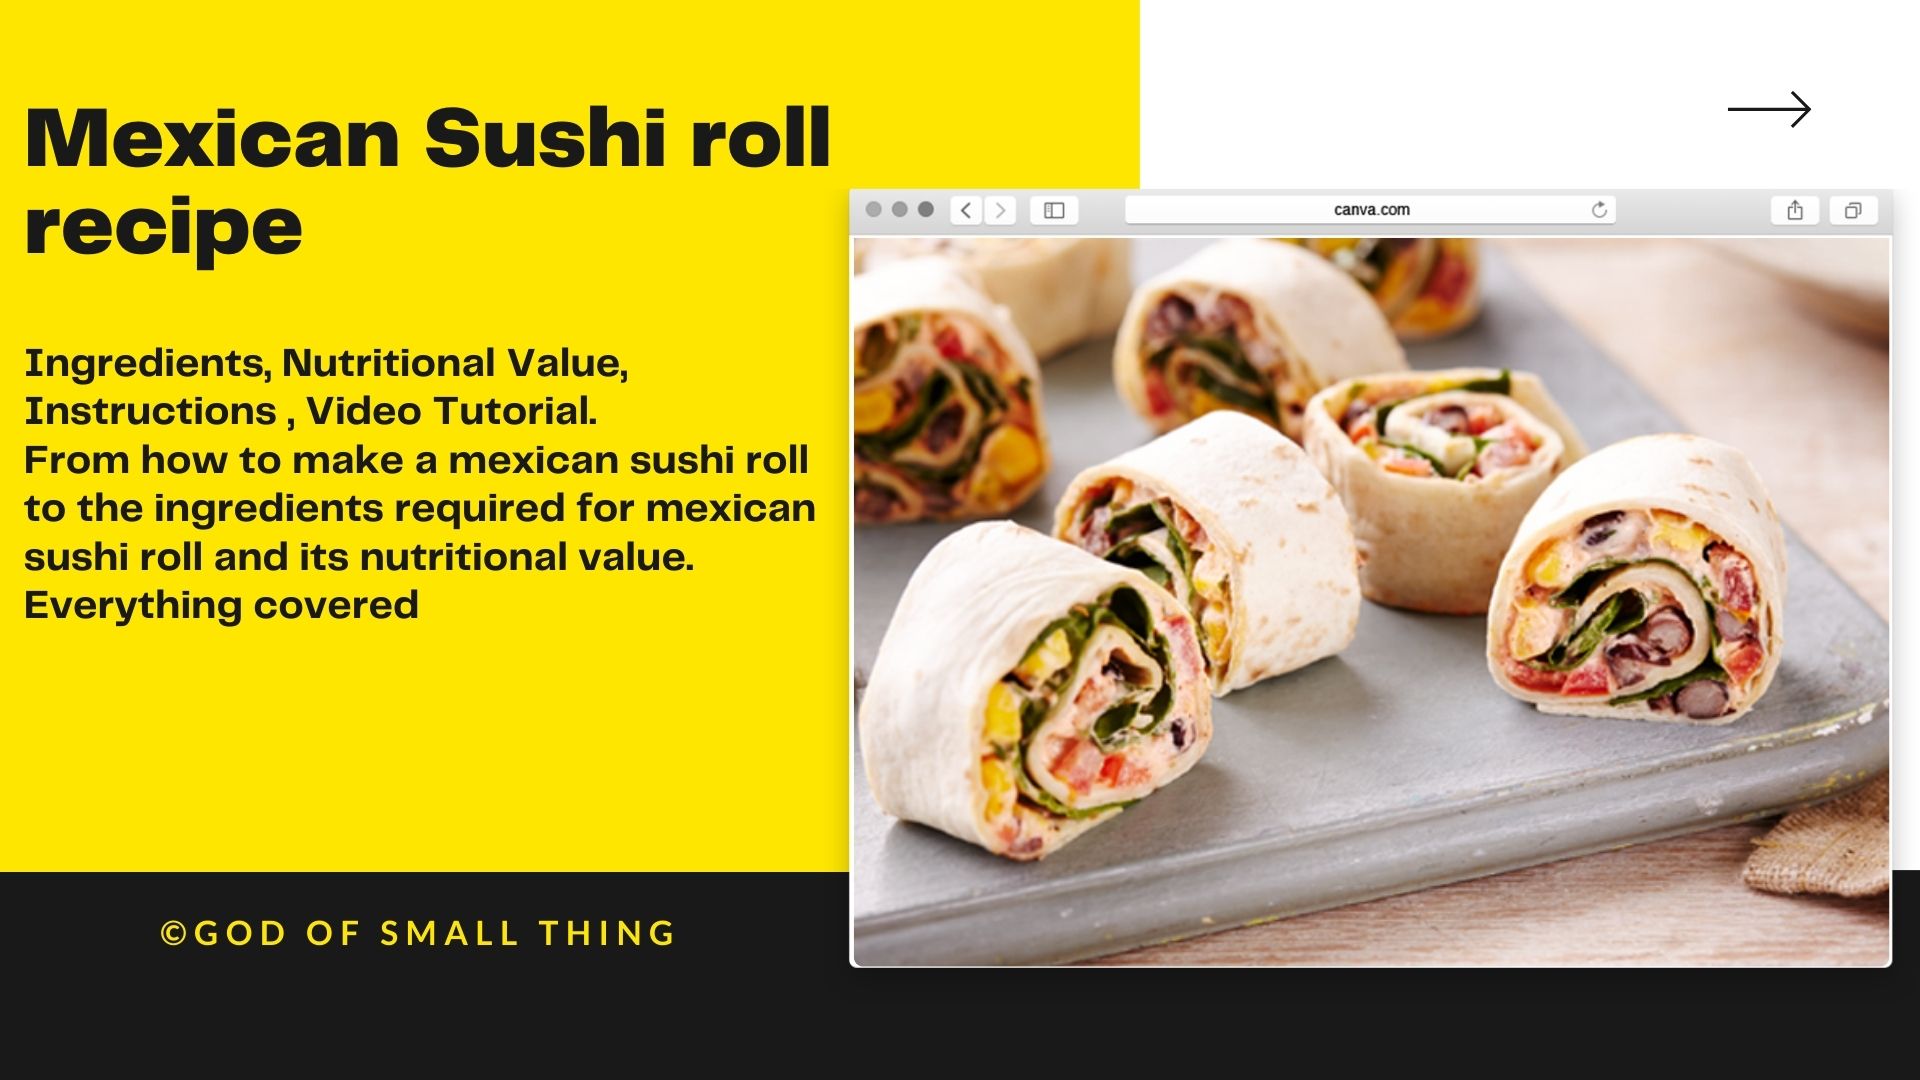 https://godofsmallthing.com/wp-content/uploads/2021/02/Mexican-Sushi-roll-recipe-.jpg